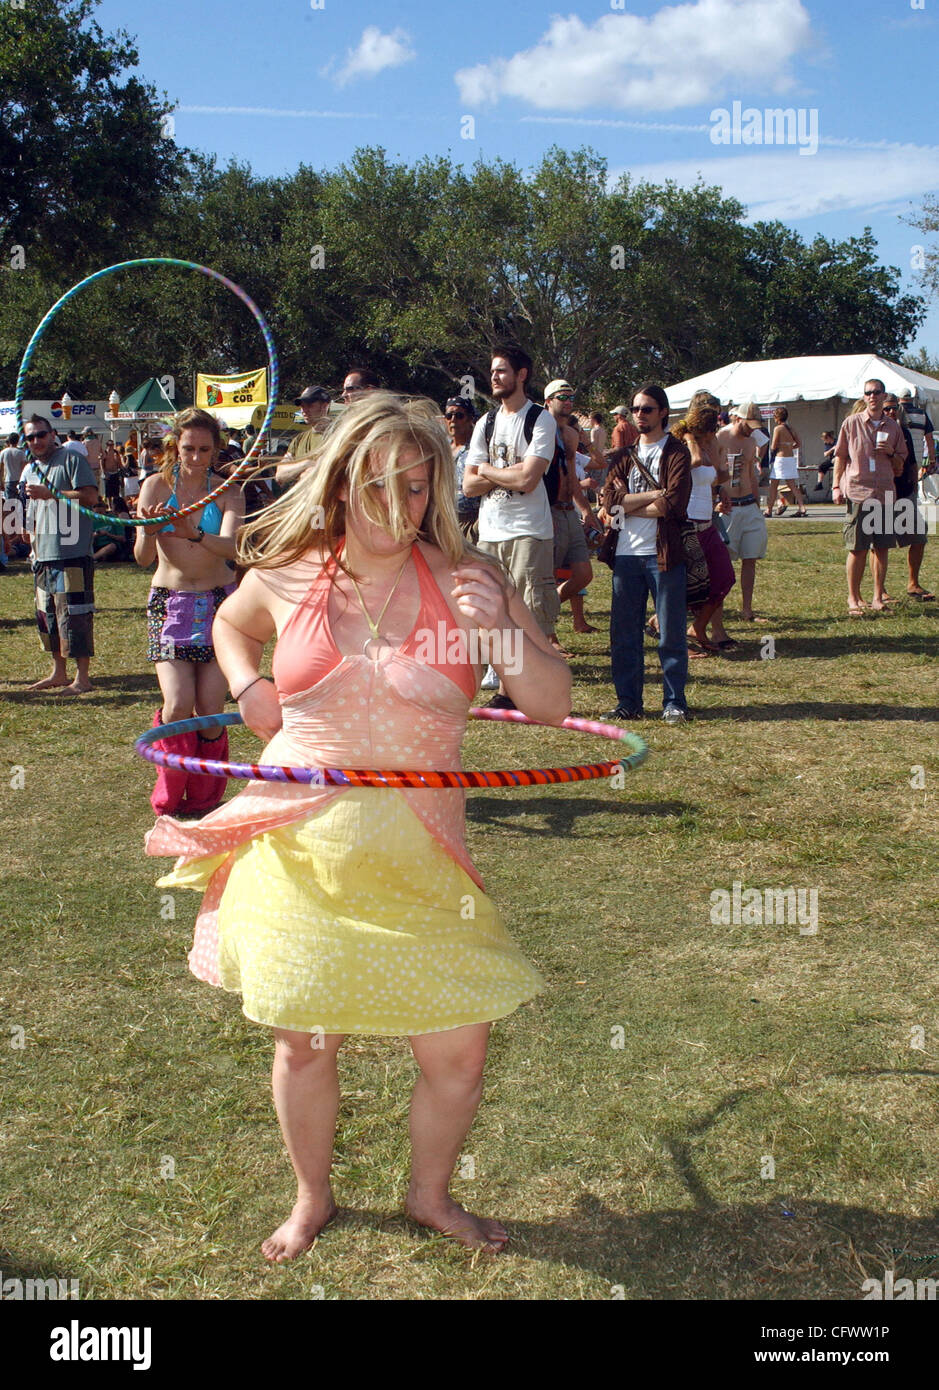 Mar. 9, 2007; Sunrise, FL., USA;  A fan turls a hula hupe at the 5th annual Langerado Music Festival that took place at Markham Park located in Sunrise.   Mandatory Credit: Photo by Jason Moore (©) Copyright 2007 by Jason Moore Stock Photo